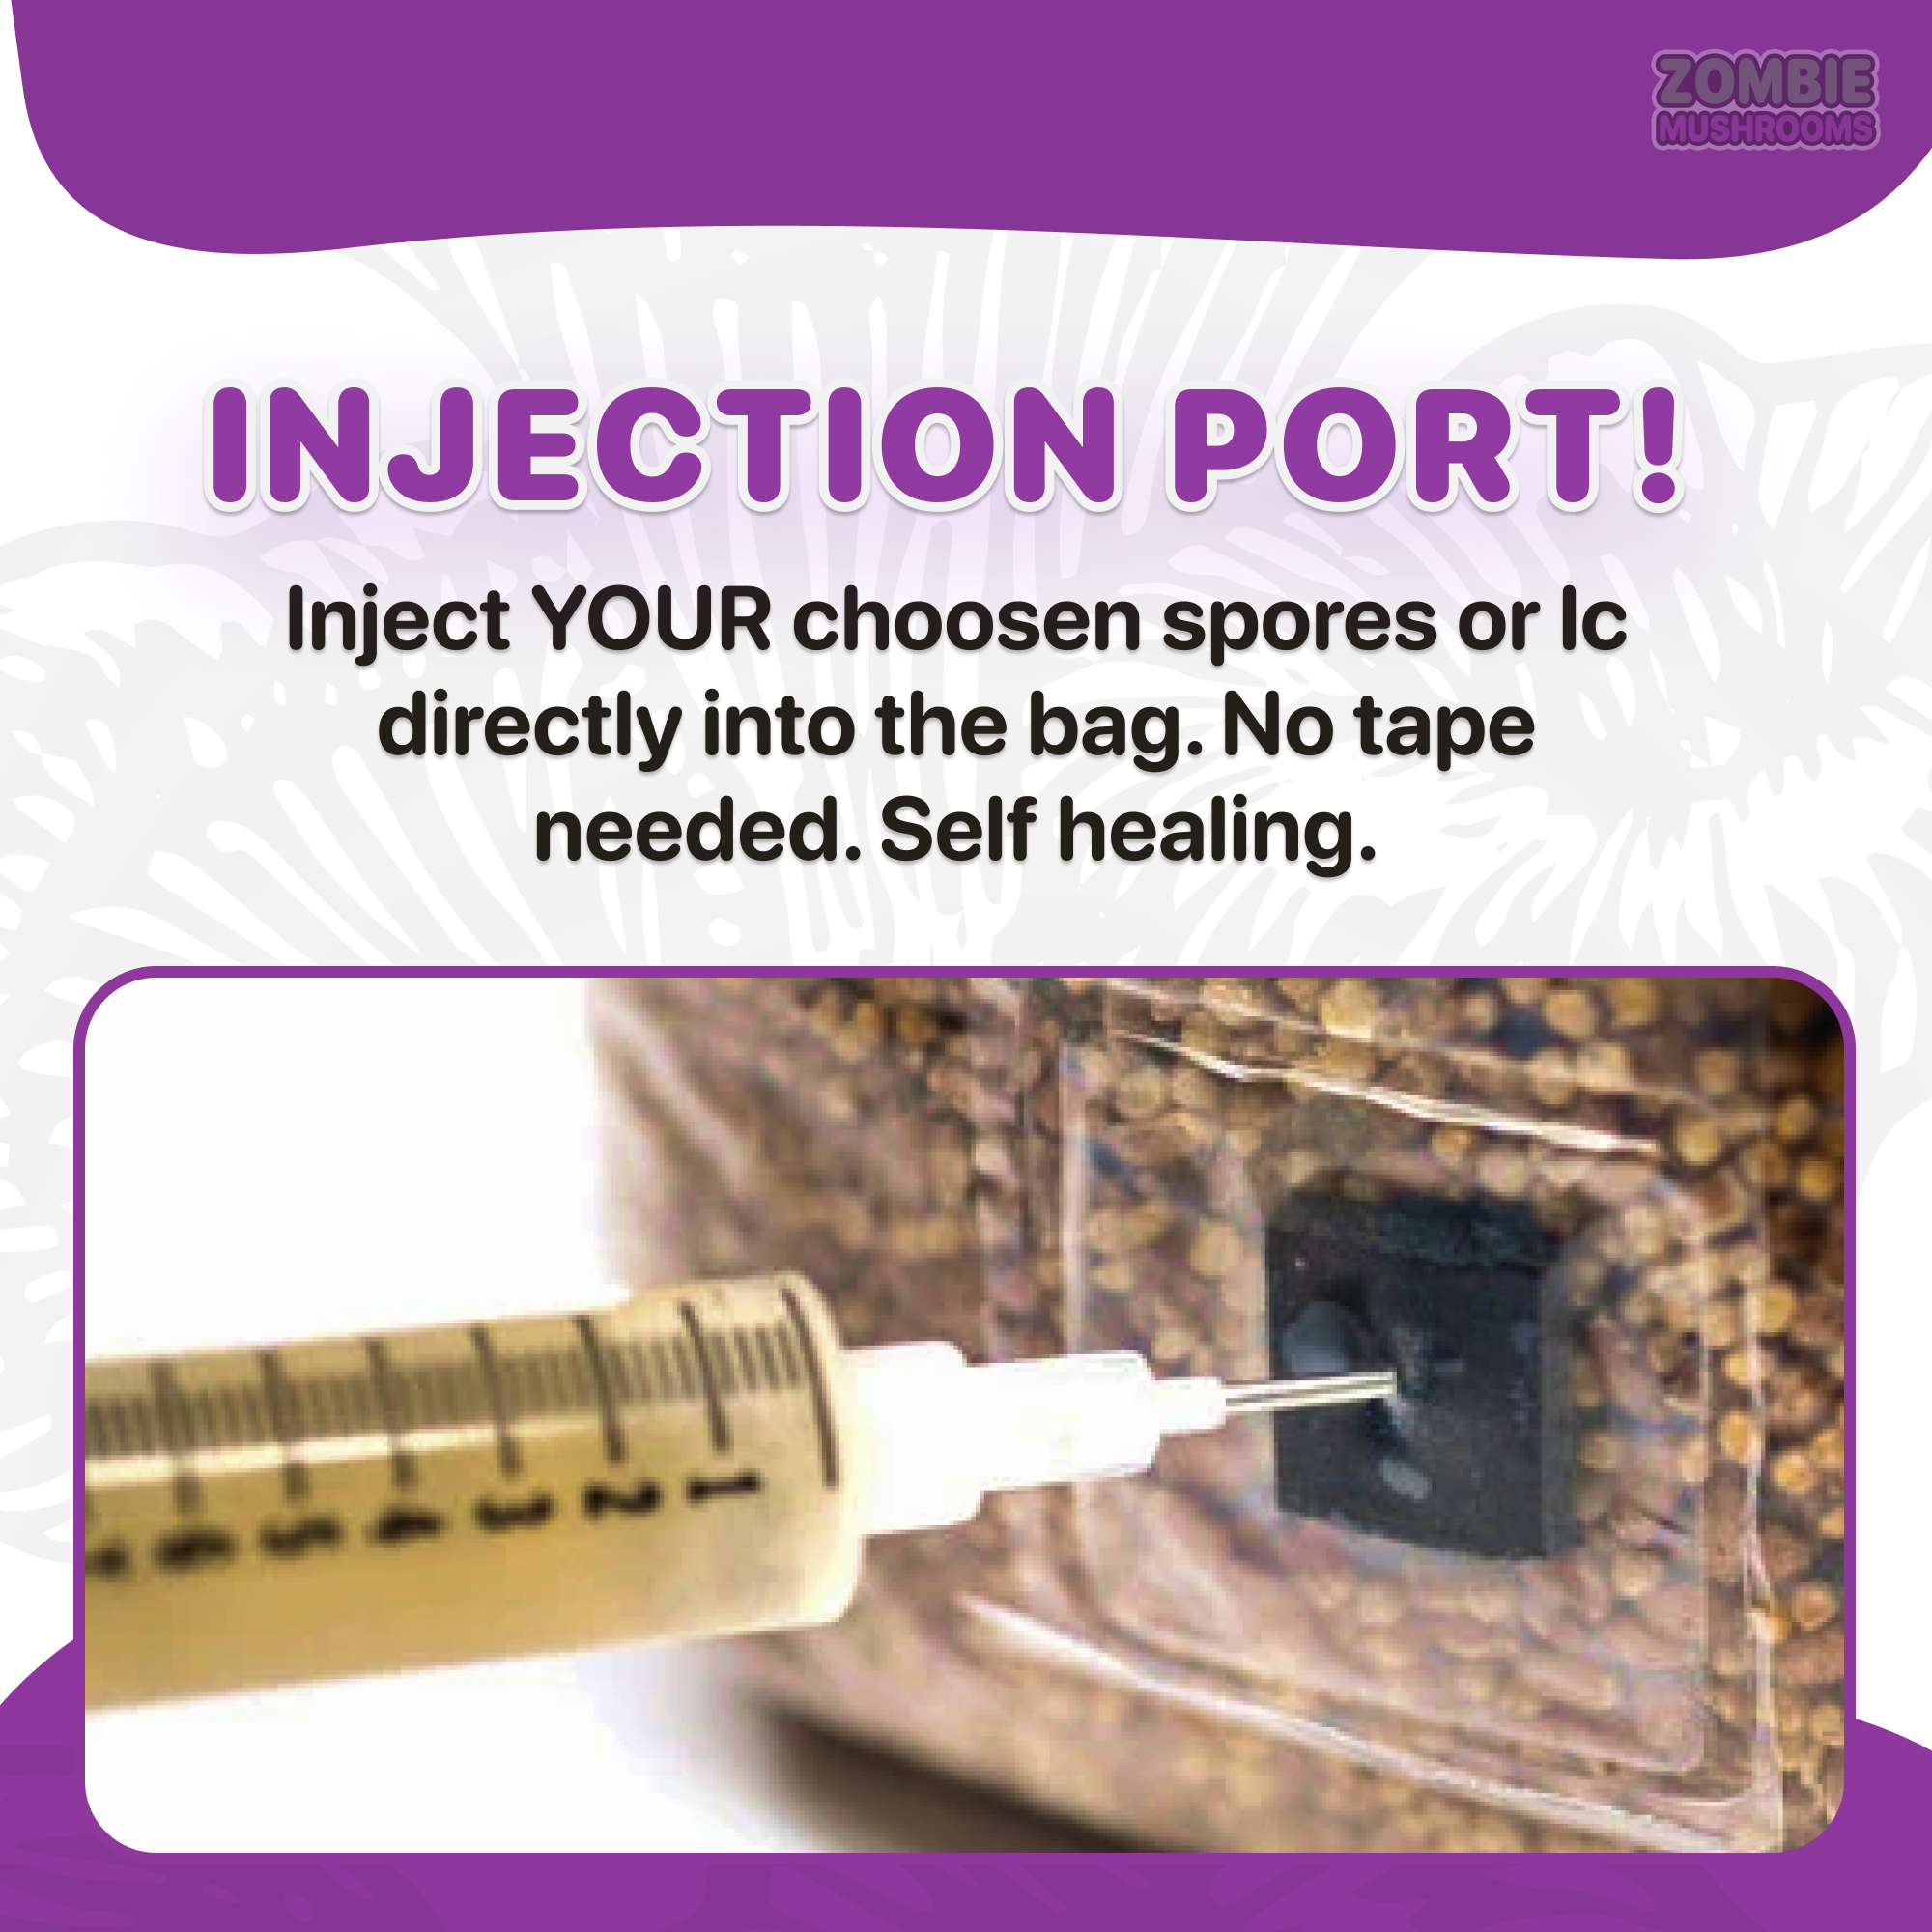 an image of injection port - self healing